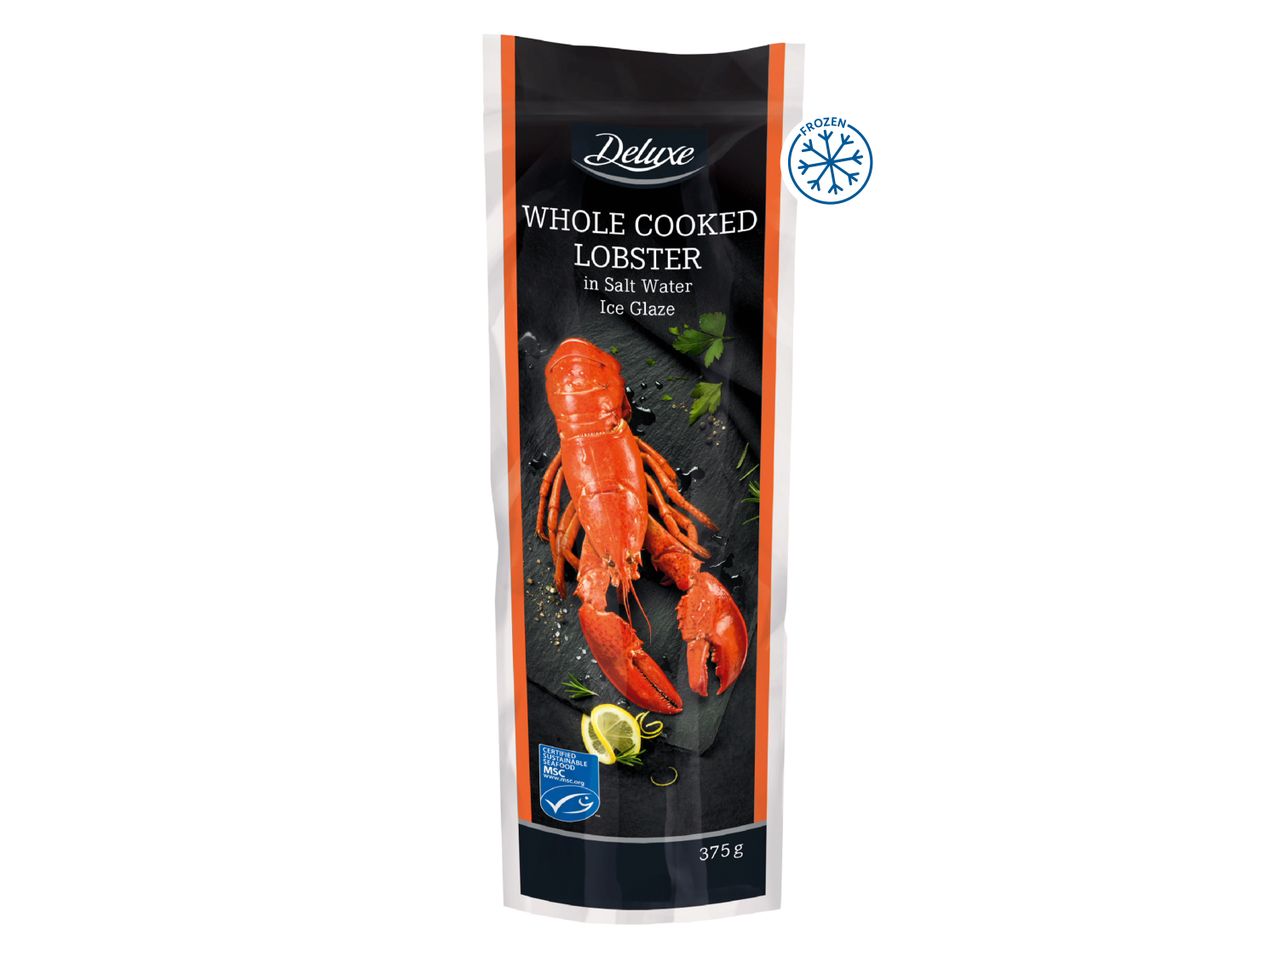 Go to full screen view: Deluxe Whole Cooked Lobster - Image 1